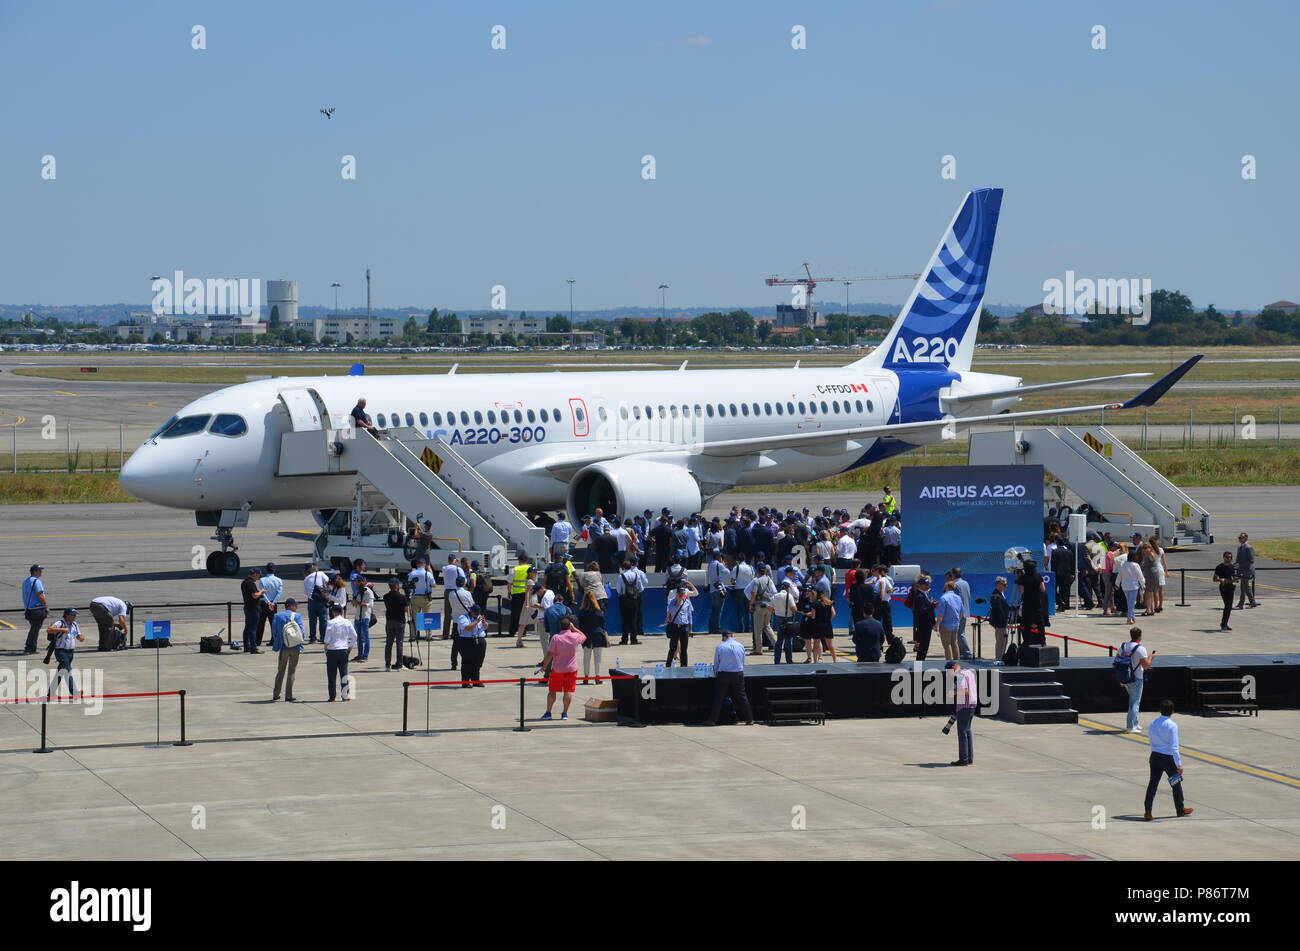 Toulouse, France. 10th July, 2018. Journalists stand in front of an aircraft of the model A220-300 on the runway at the Airbus delivery centre near Toulouse. The European aircraft manufacturer Airbus renames the medium haul destinations series C-Series taken over by Bombardier into A220. Credit: Sebastian Kunigkeit/dpa/Alamy Live News Stock Photo